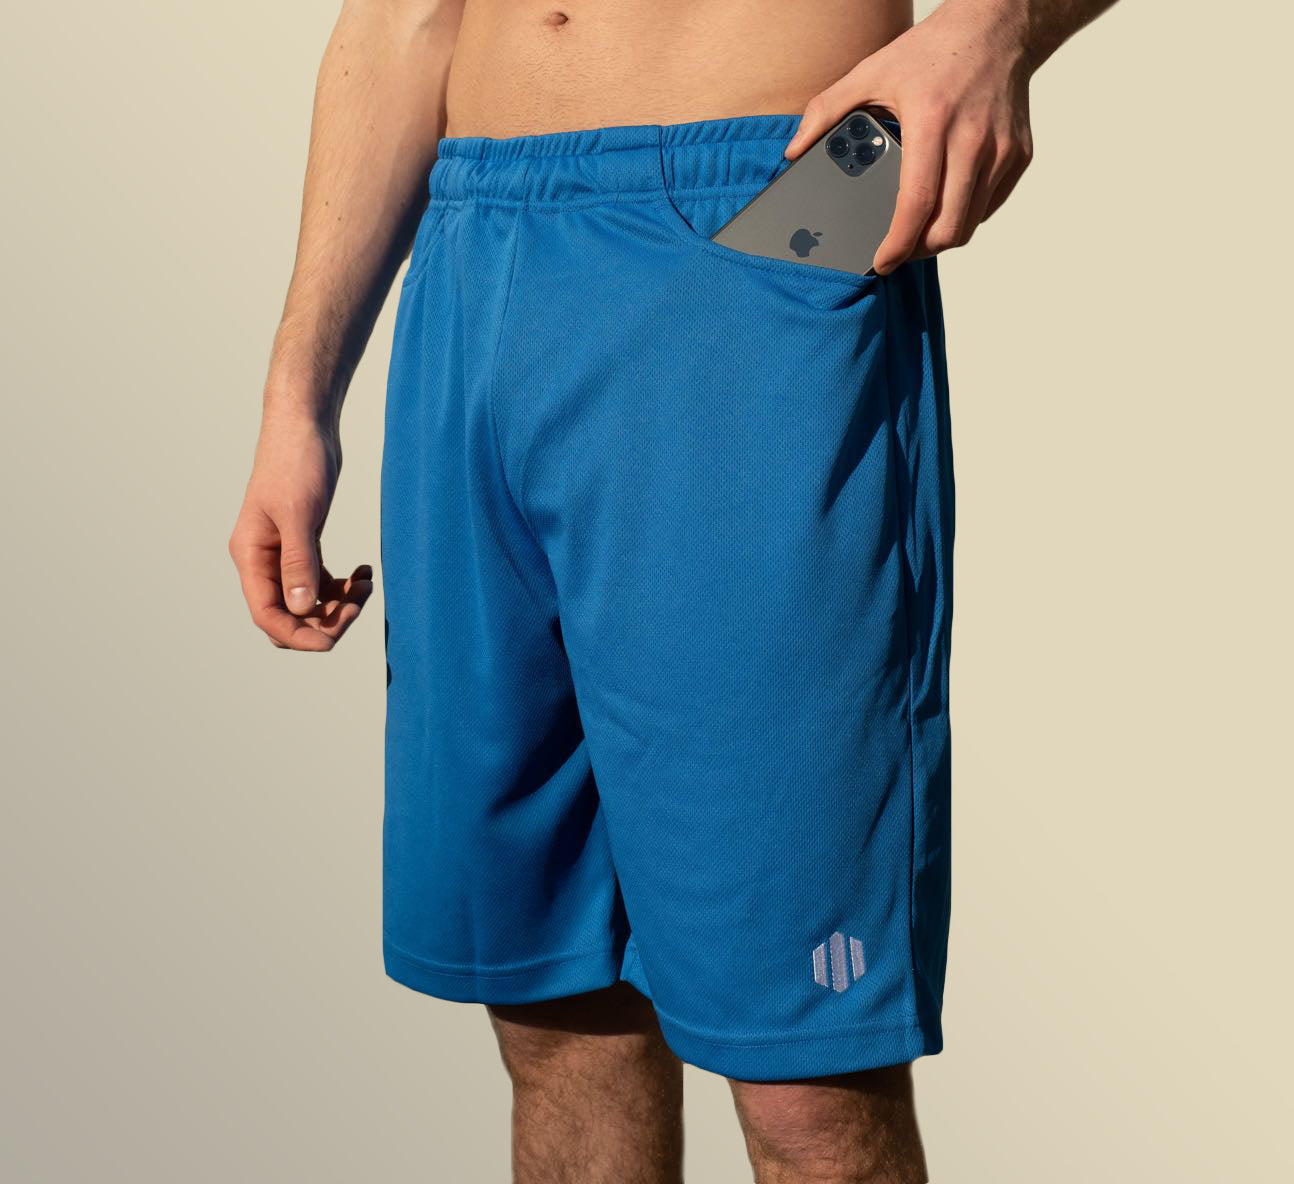 Mens athletic shorts with pockets